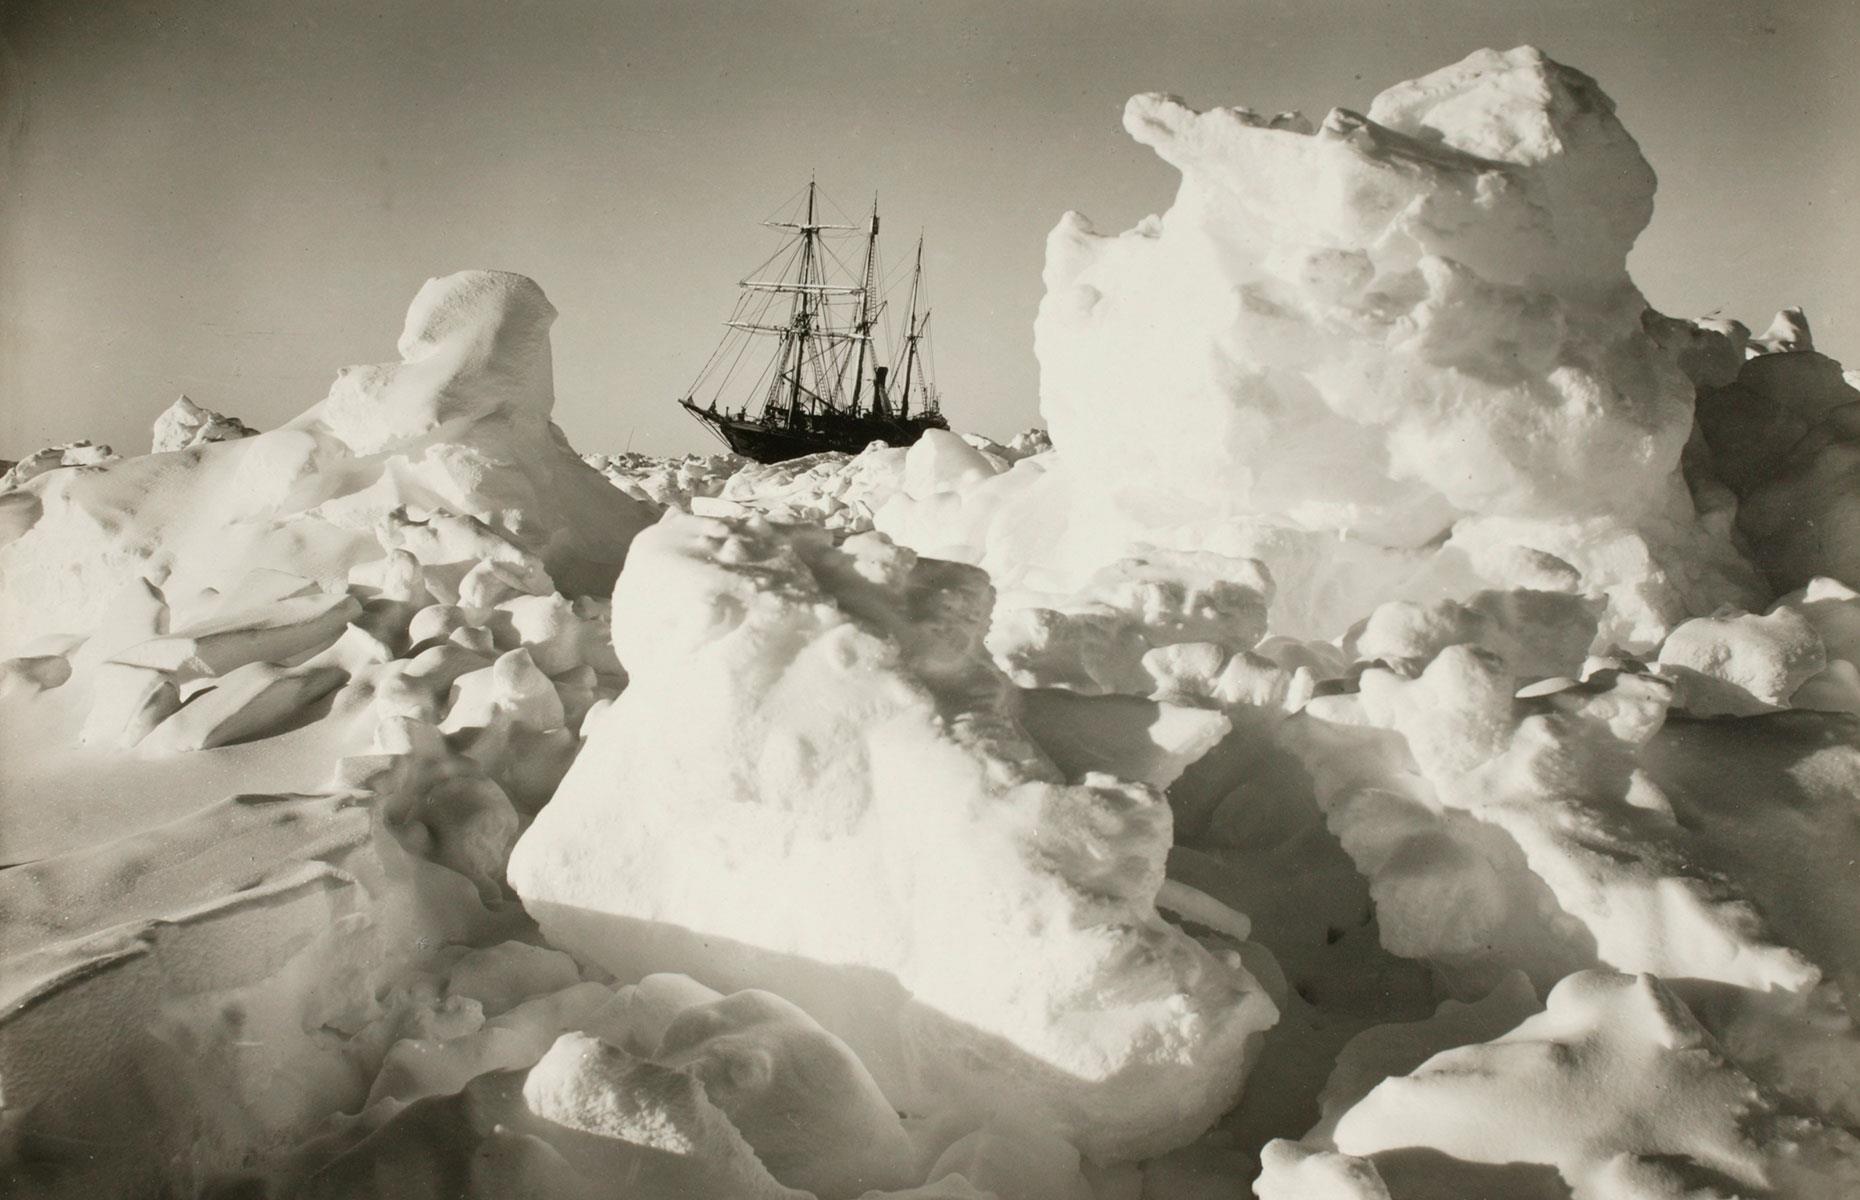 Shackleton’s bravery knew no limits. In 1914, he set off on his third trip to the Antarctic on the ship Endurance (pictured), but in early 1915, the ship became trapped in the ice and, after 10 months, sank. Shackleton and crew were forced to live on floating ice but, eventually, they set off for the mountainous Elephant Island off the coast of Antarctica in five small boats. From Elephant Island, Shackleton chose five crew members and they set sail in one small boat to get help.